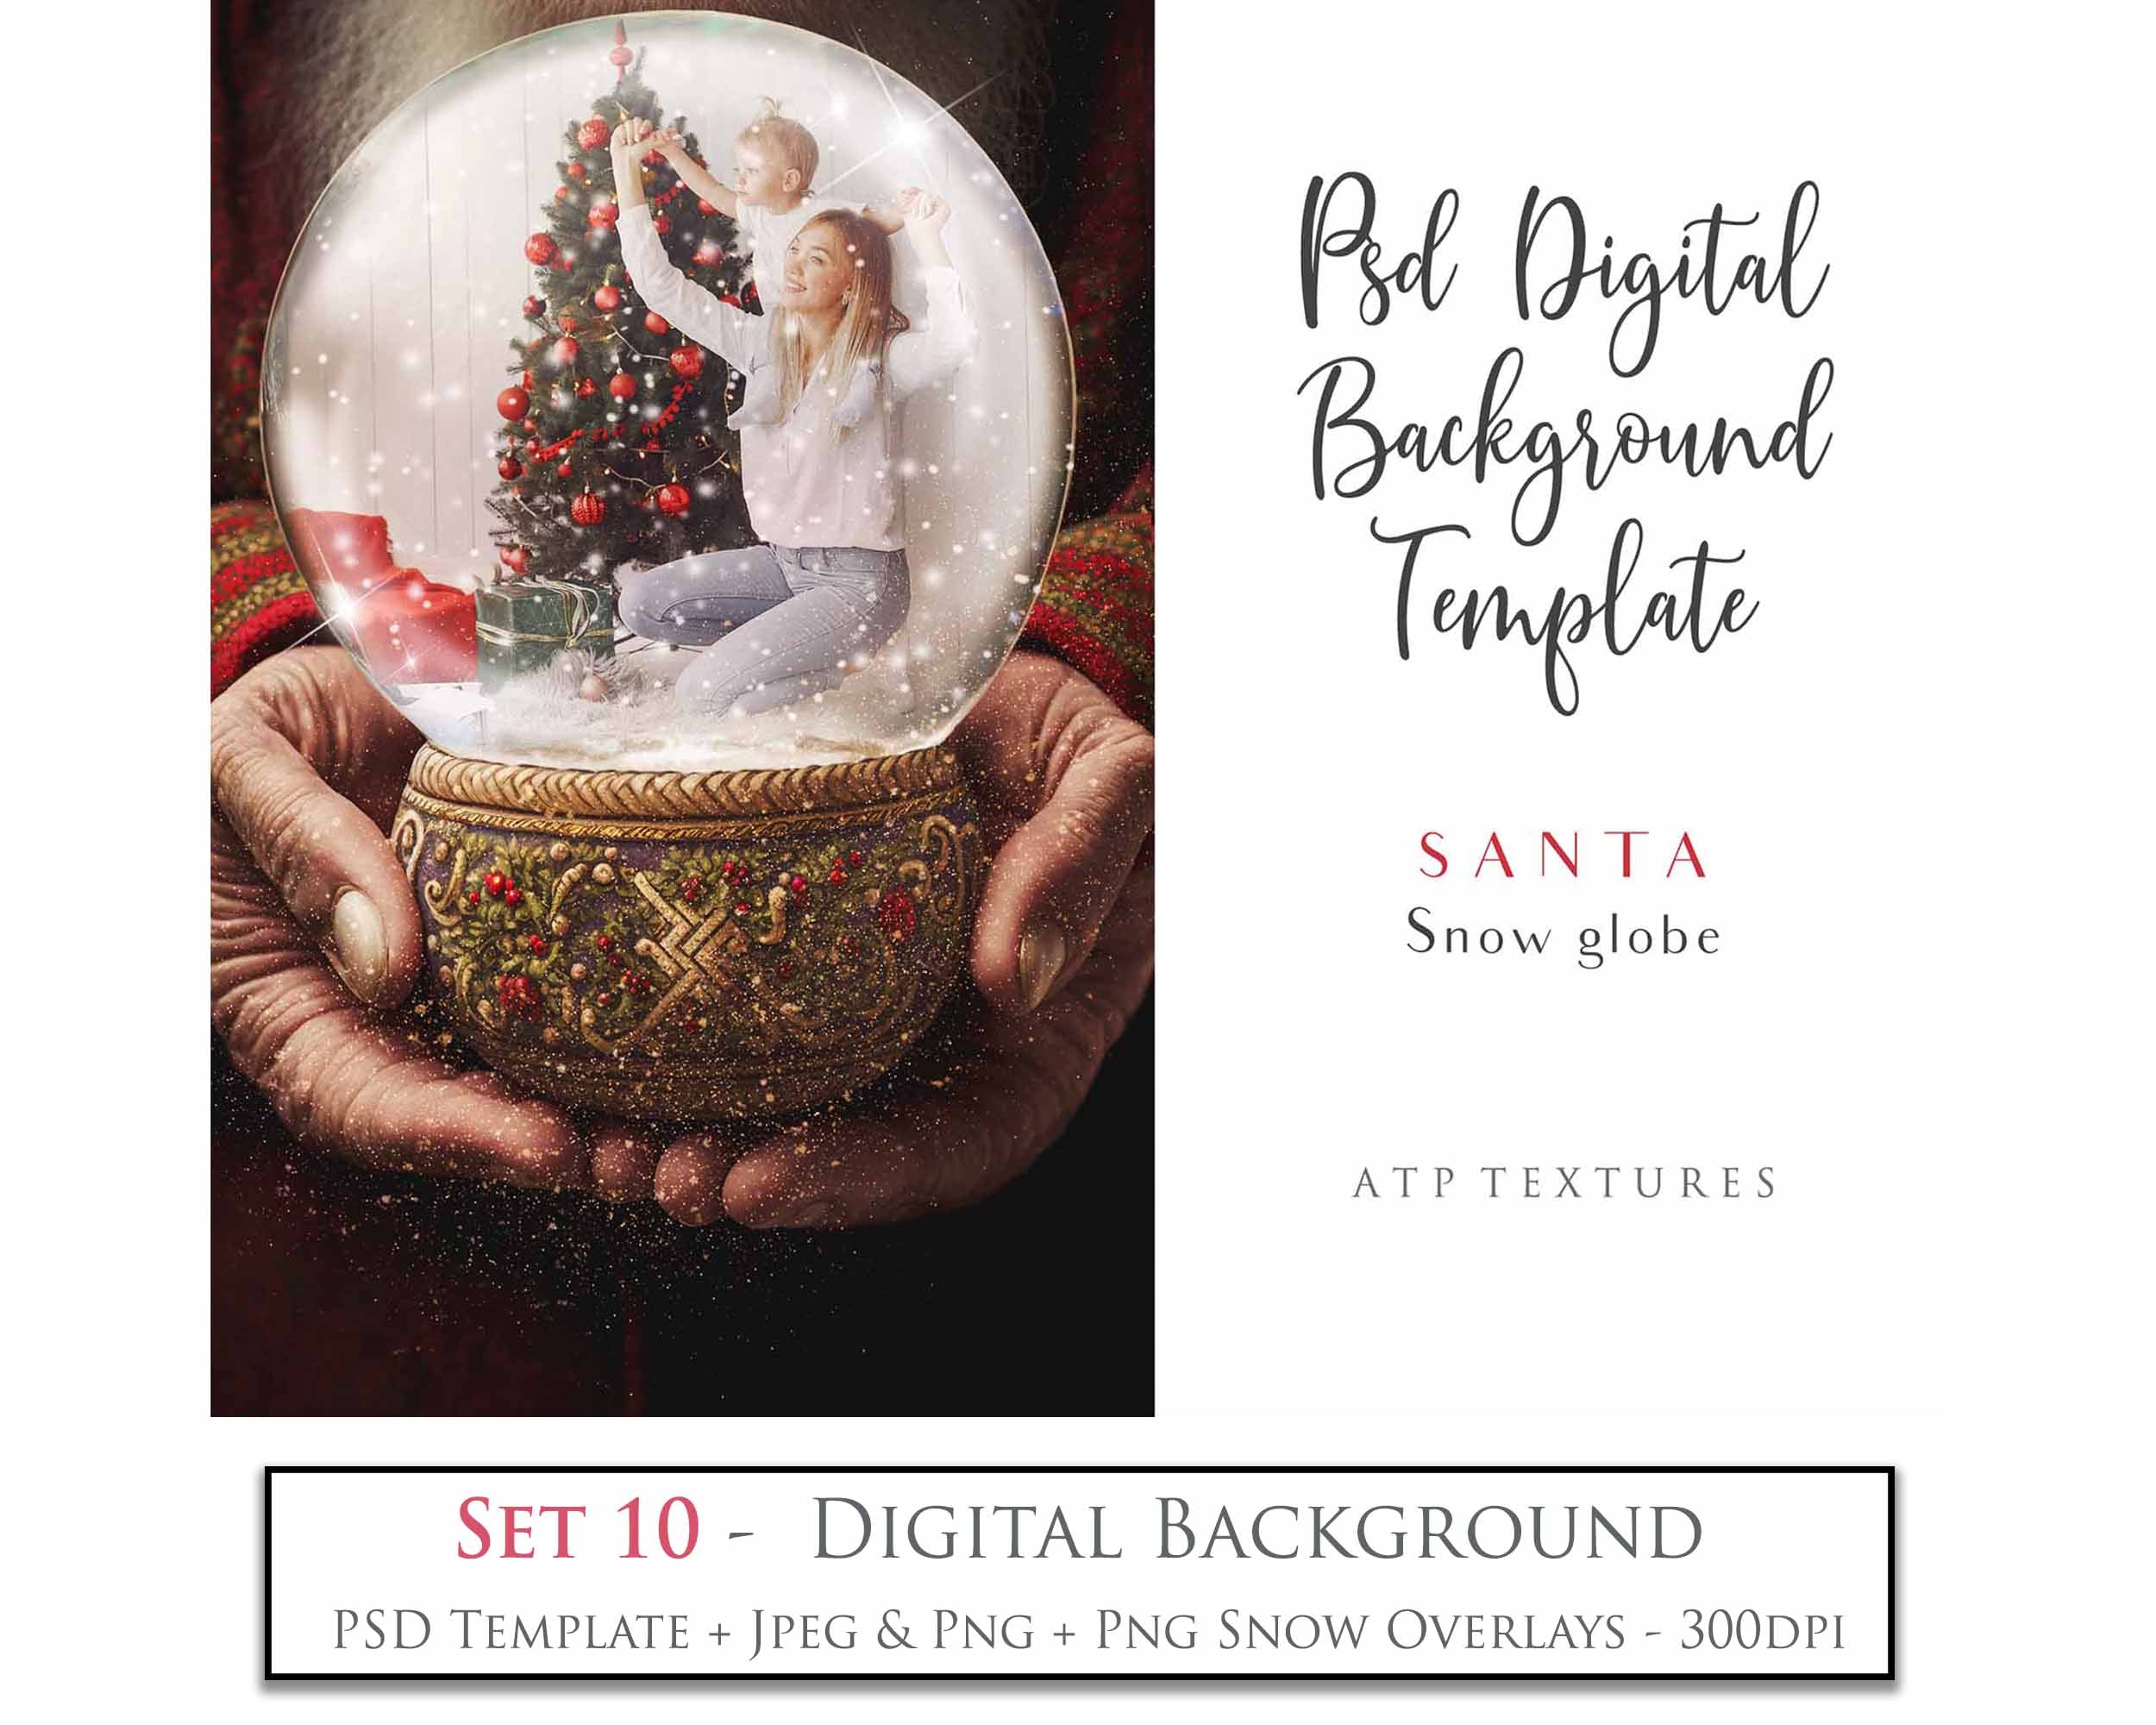 Digital Snow Globe Background, with snow Overlays and a PSD Template included in the set.The globe is transparent, perfect for you to add your own images and retain the snow globe effect. Printable Card for Christmas with Santa Window. ATP Textures